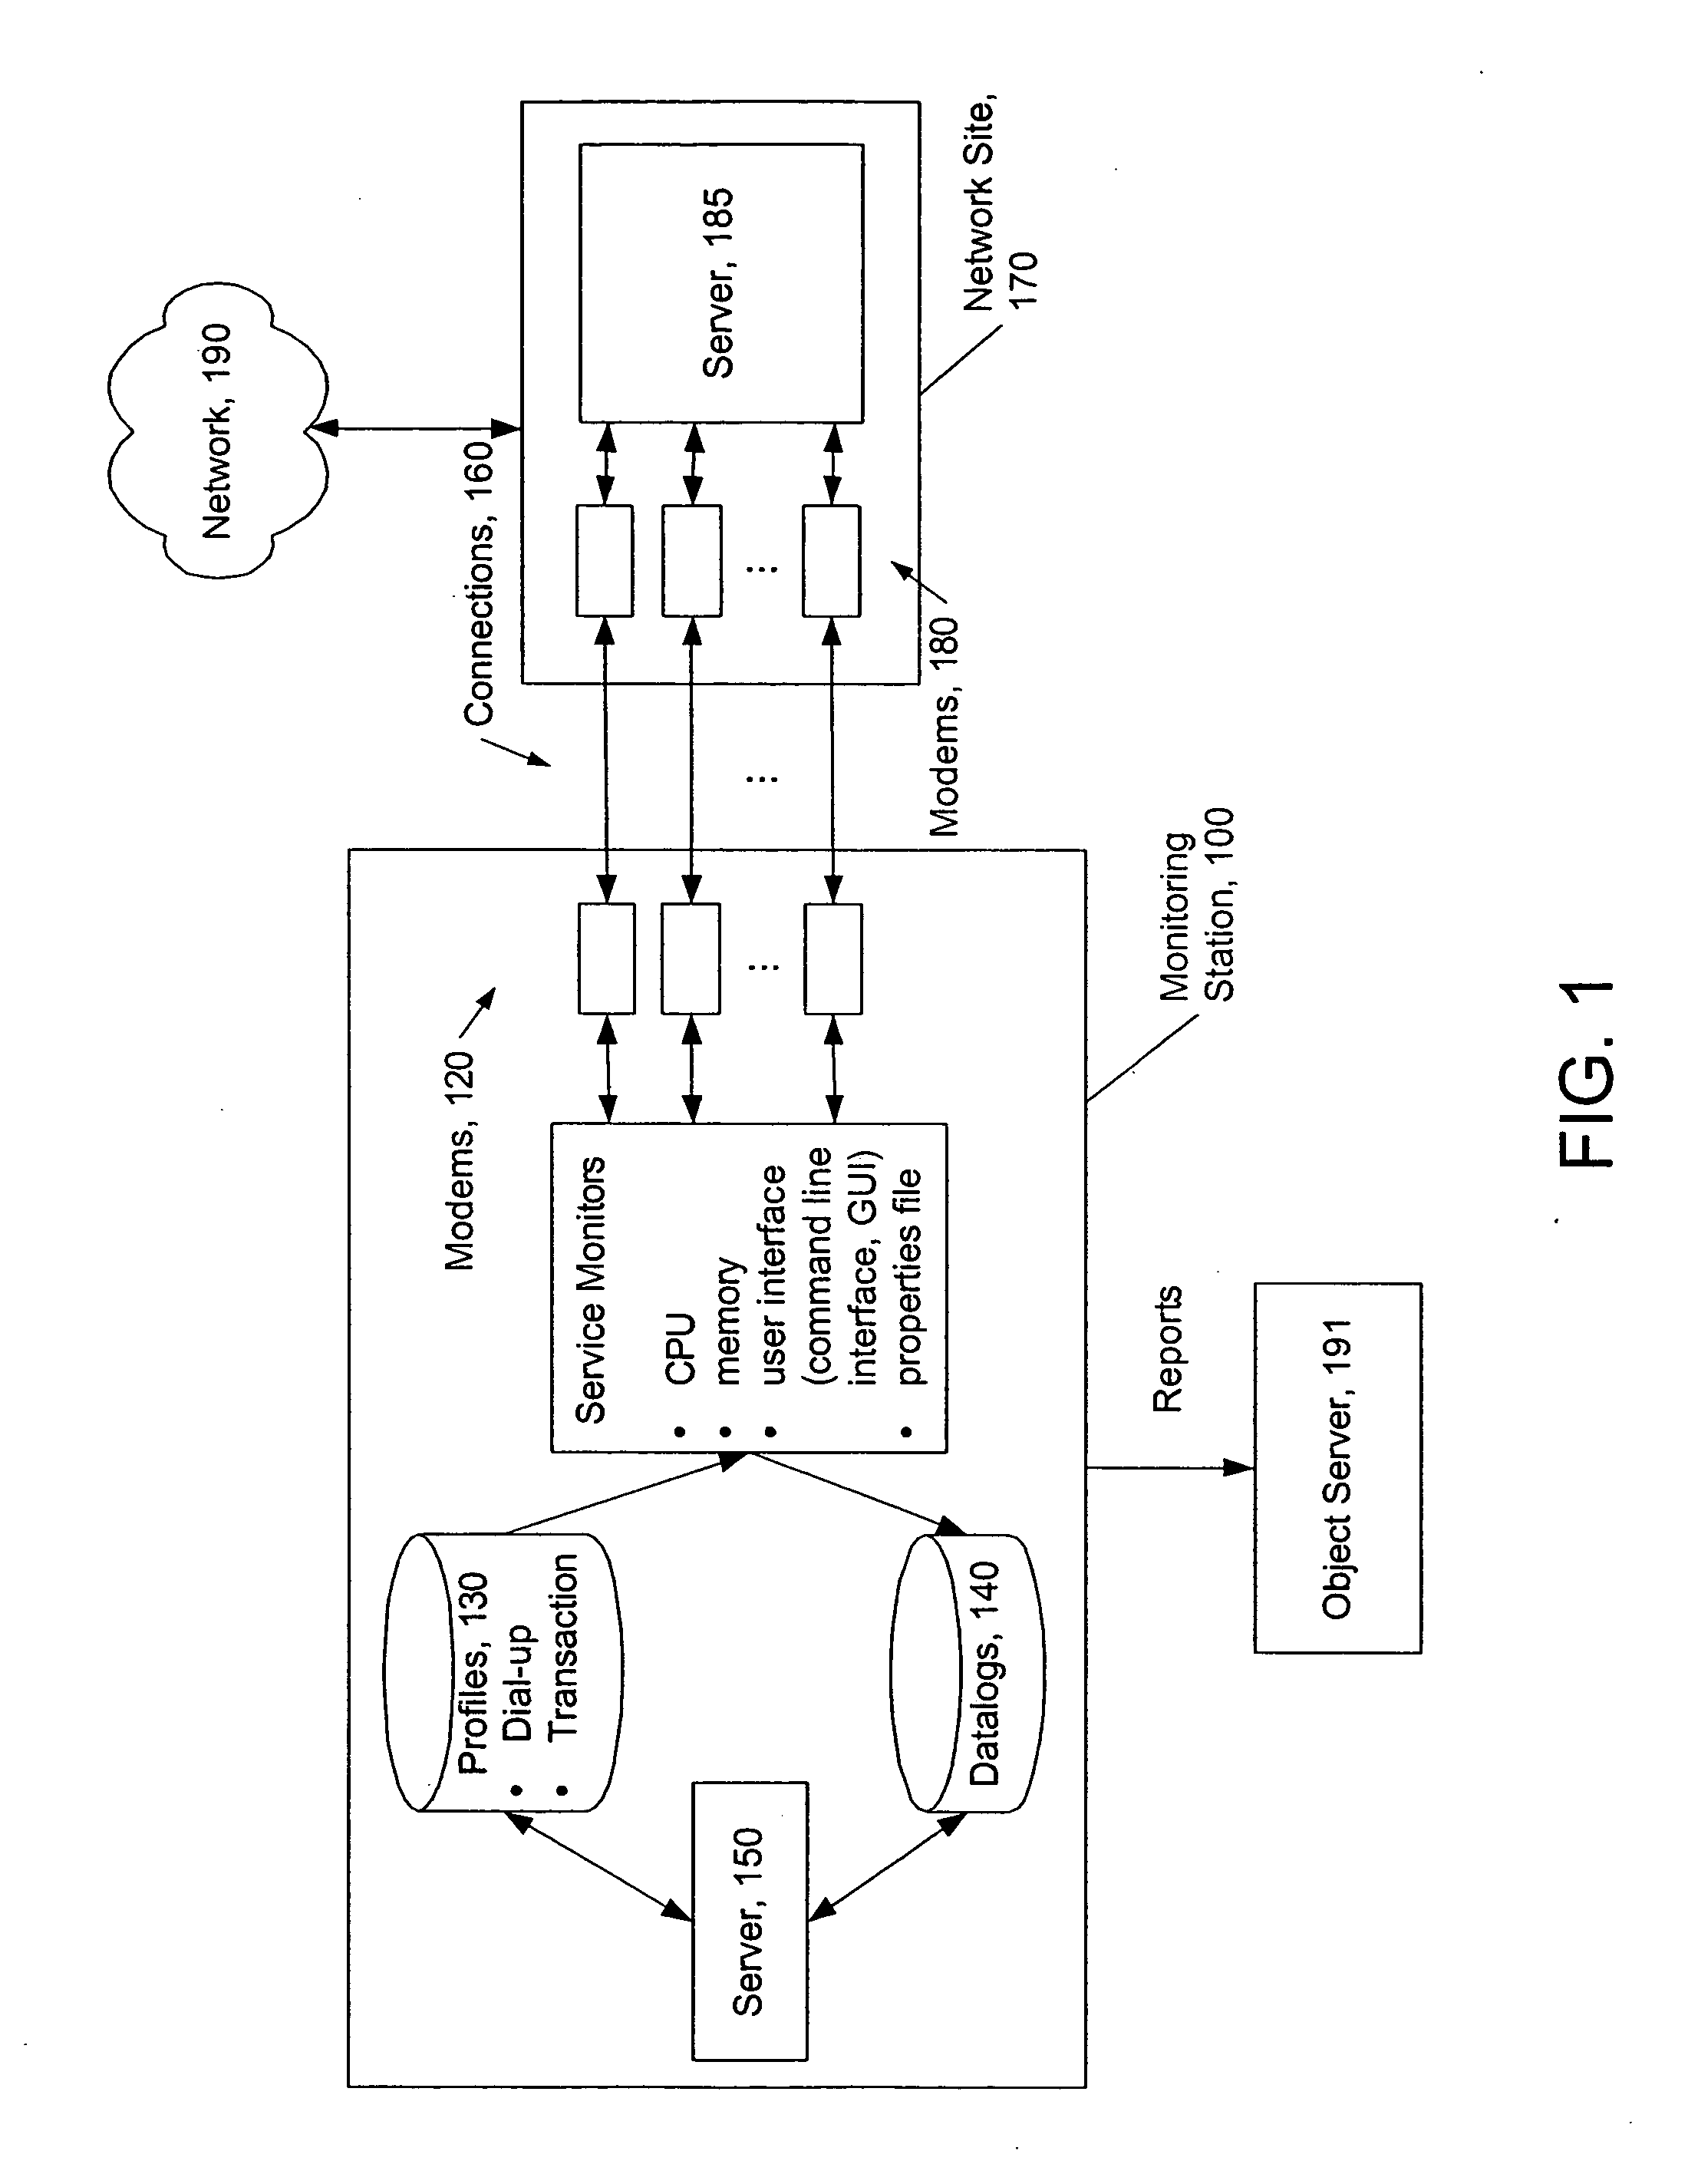 System and method for testing multiple dial-up points in a communications network